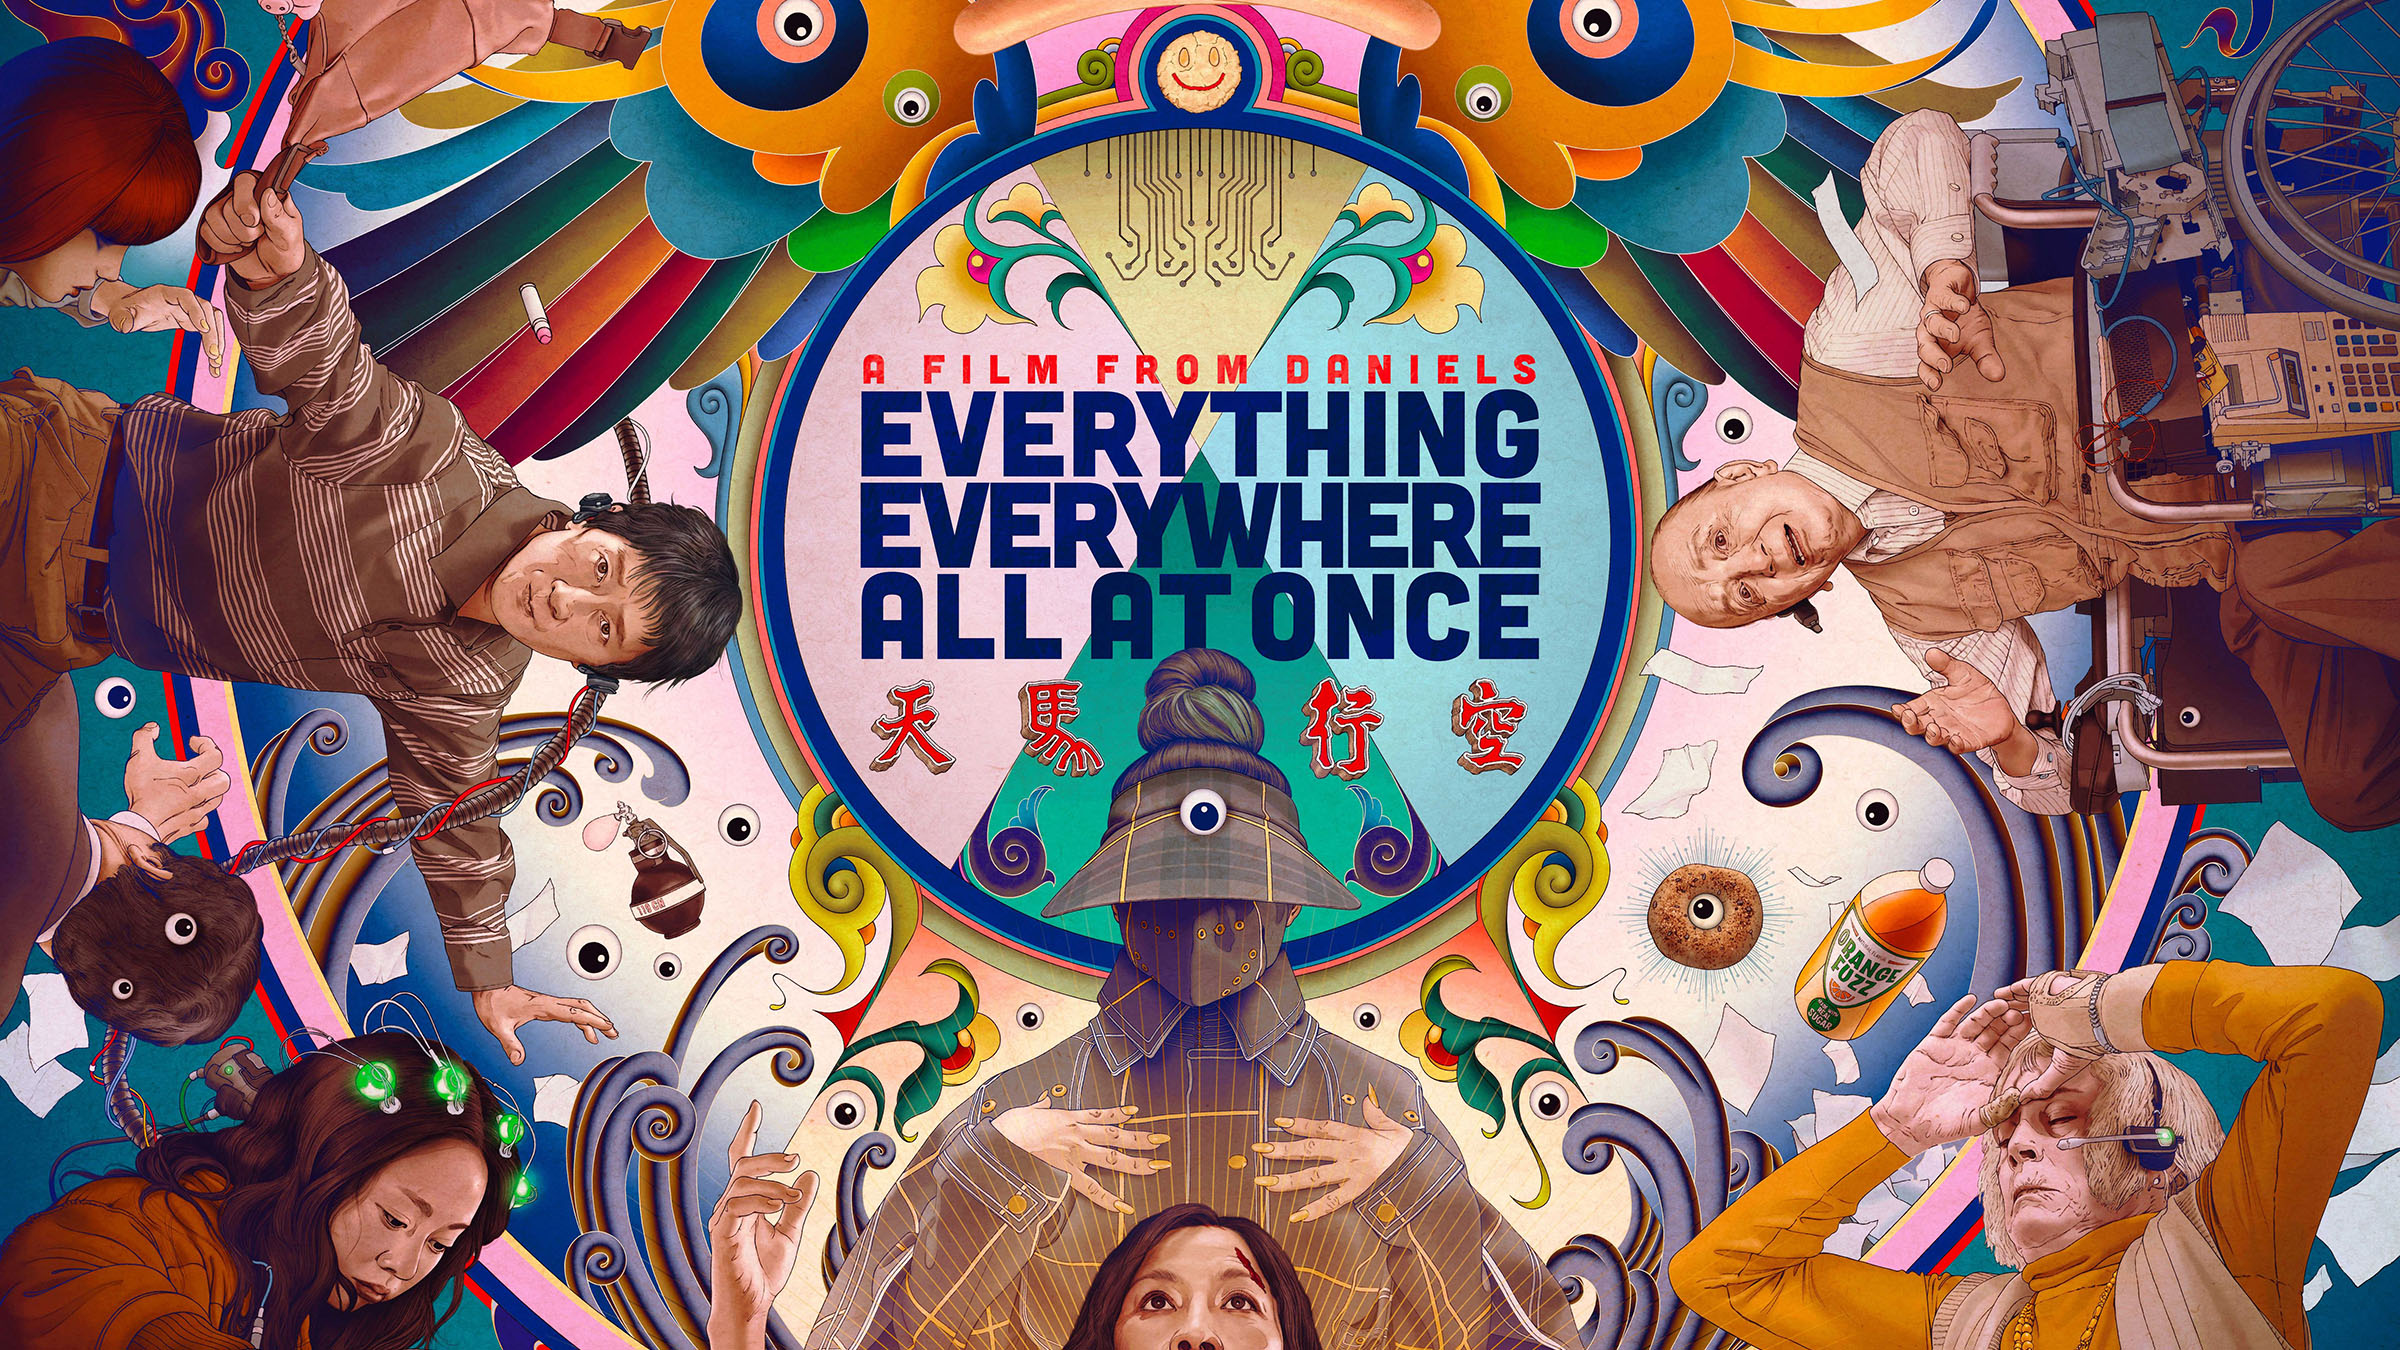 Art of the Cut: Everything Everywhere All at Once